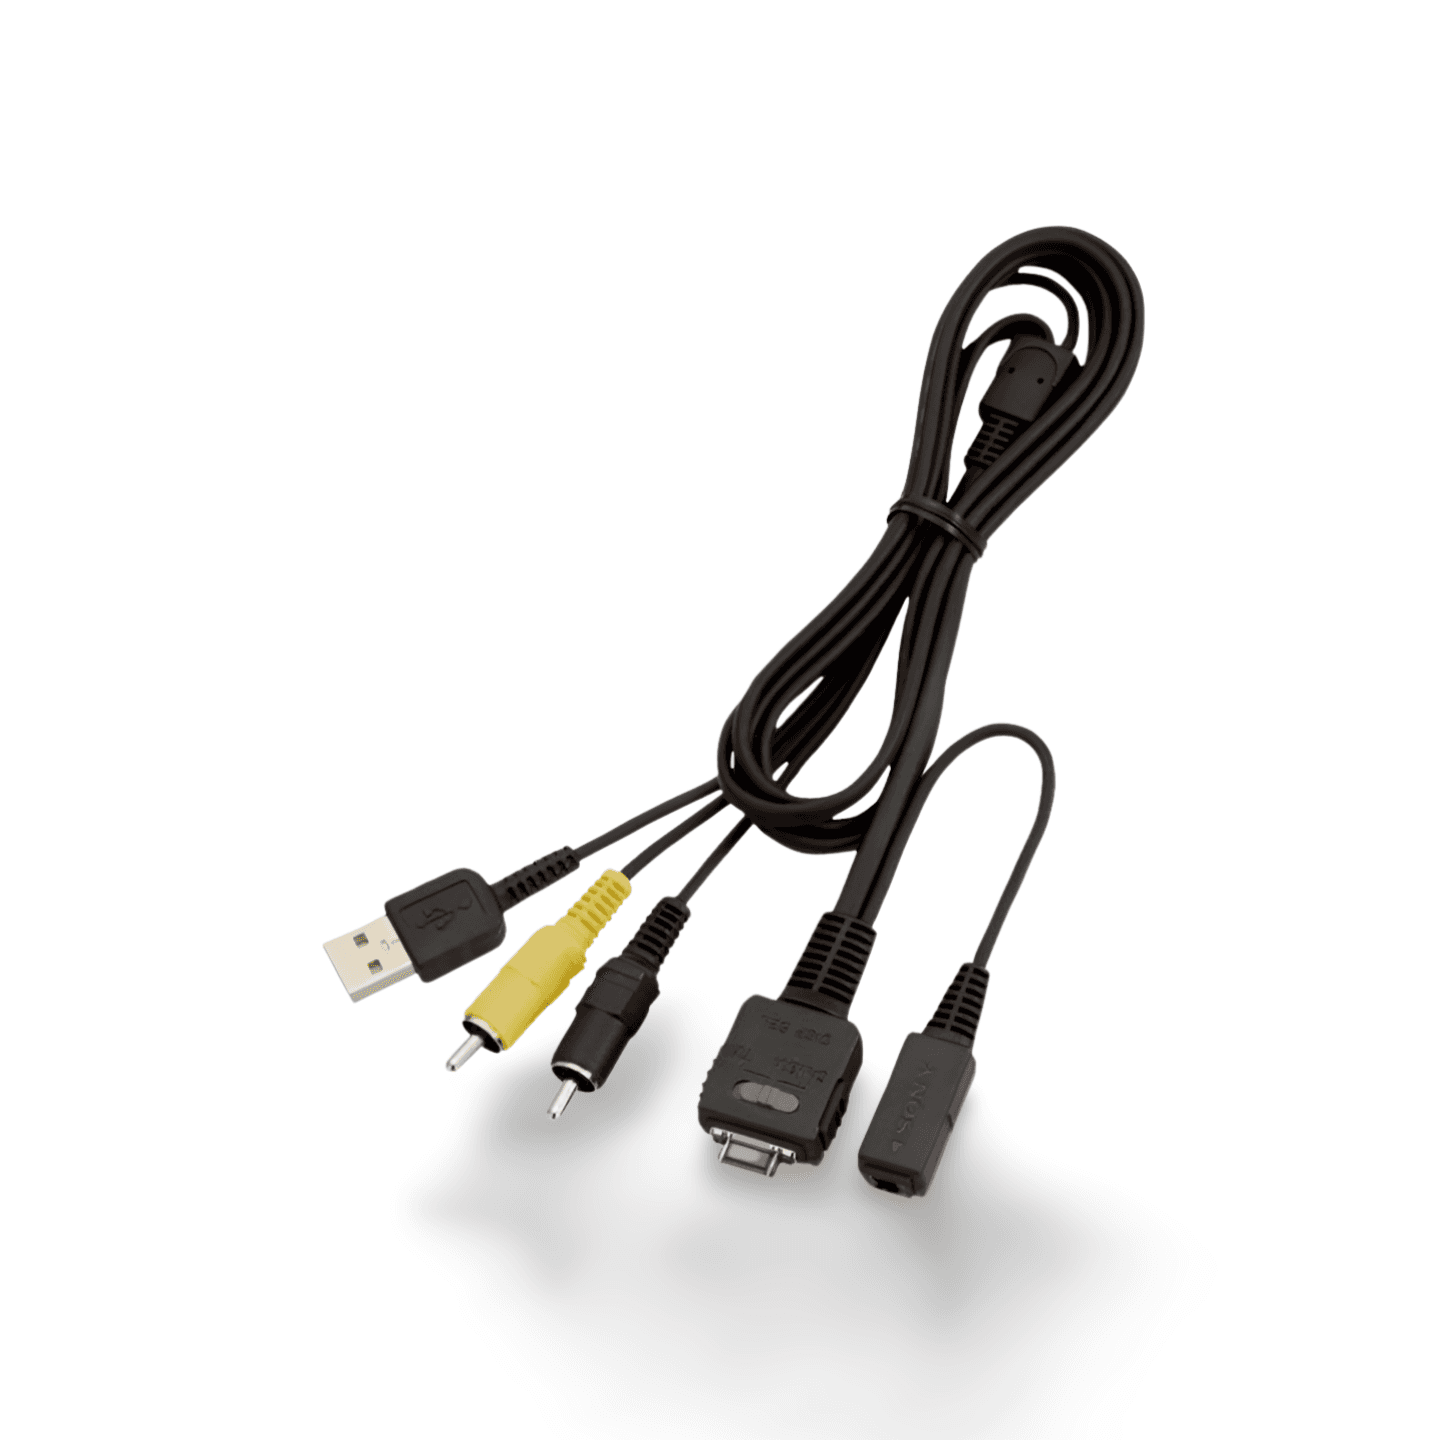 2 6ft Sony VMC MD1 Camera Cable USB Audio Video black